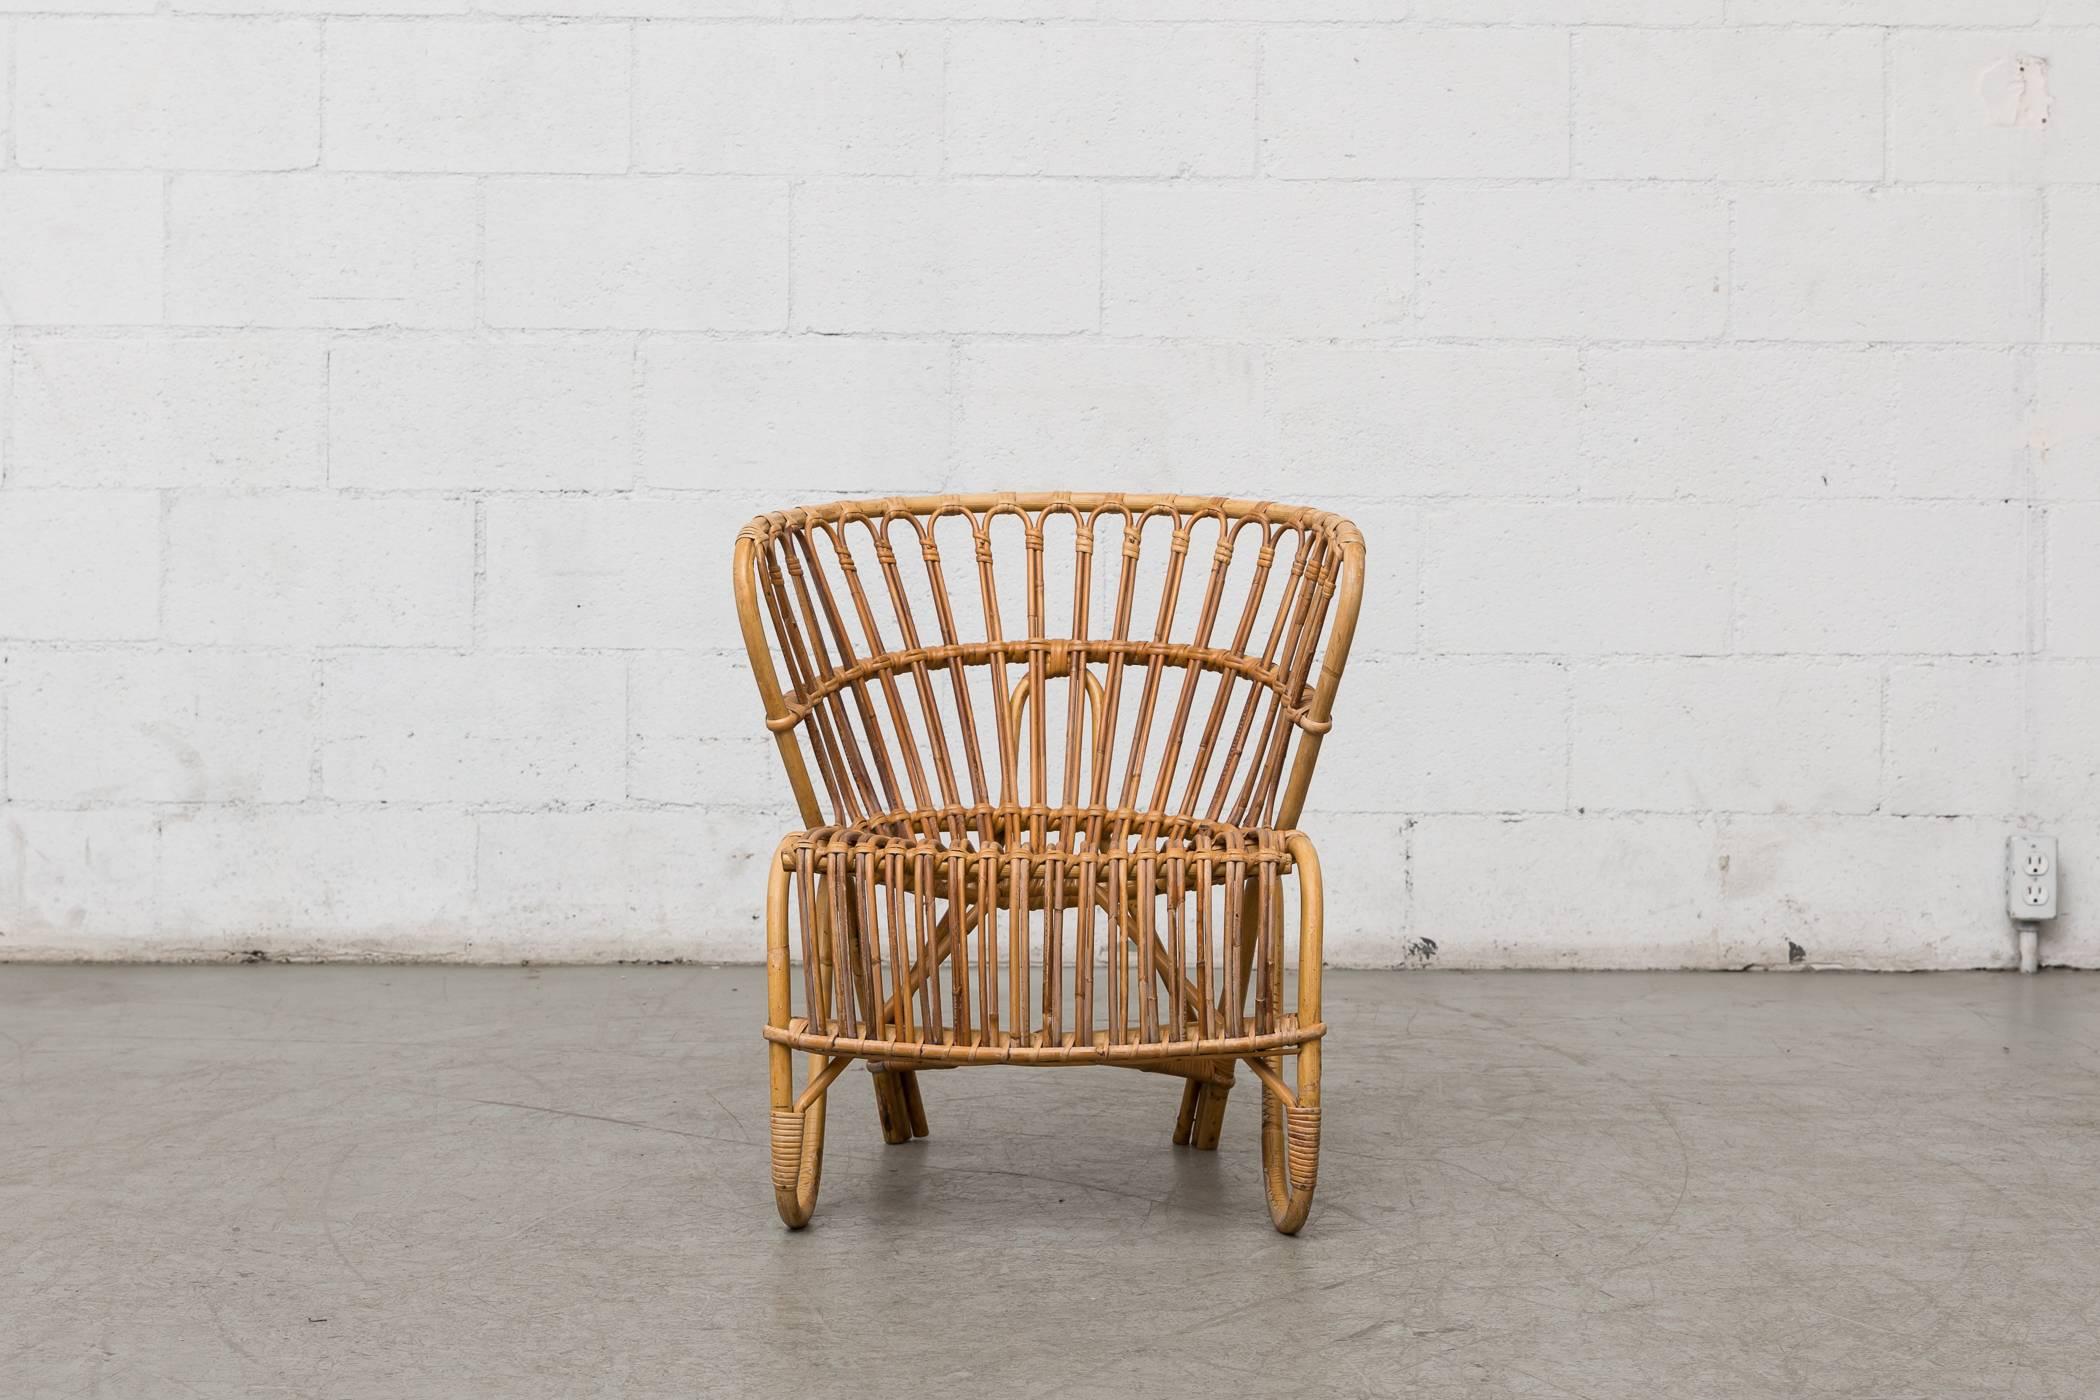 Midcentury natural bamboo lounge chair with minimal bamboo loss and breakage. Wear consistent with its age and usage.